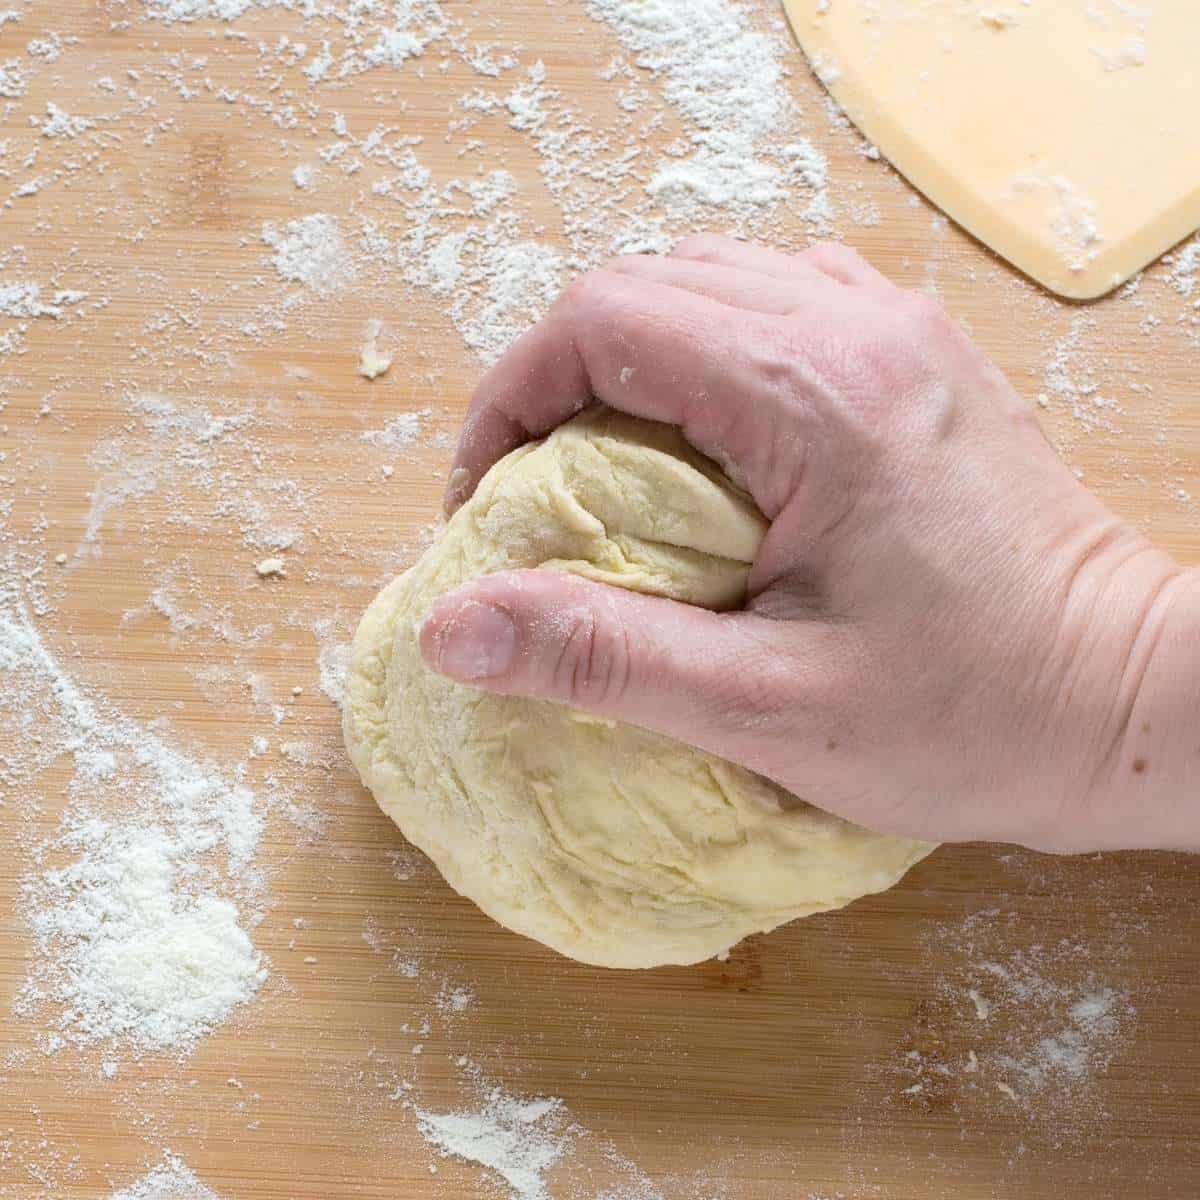 Kneading strudel dough with a hand, on a floured working surface.